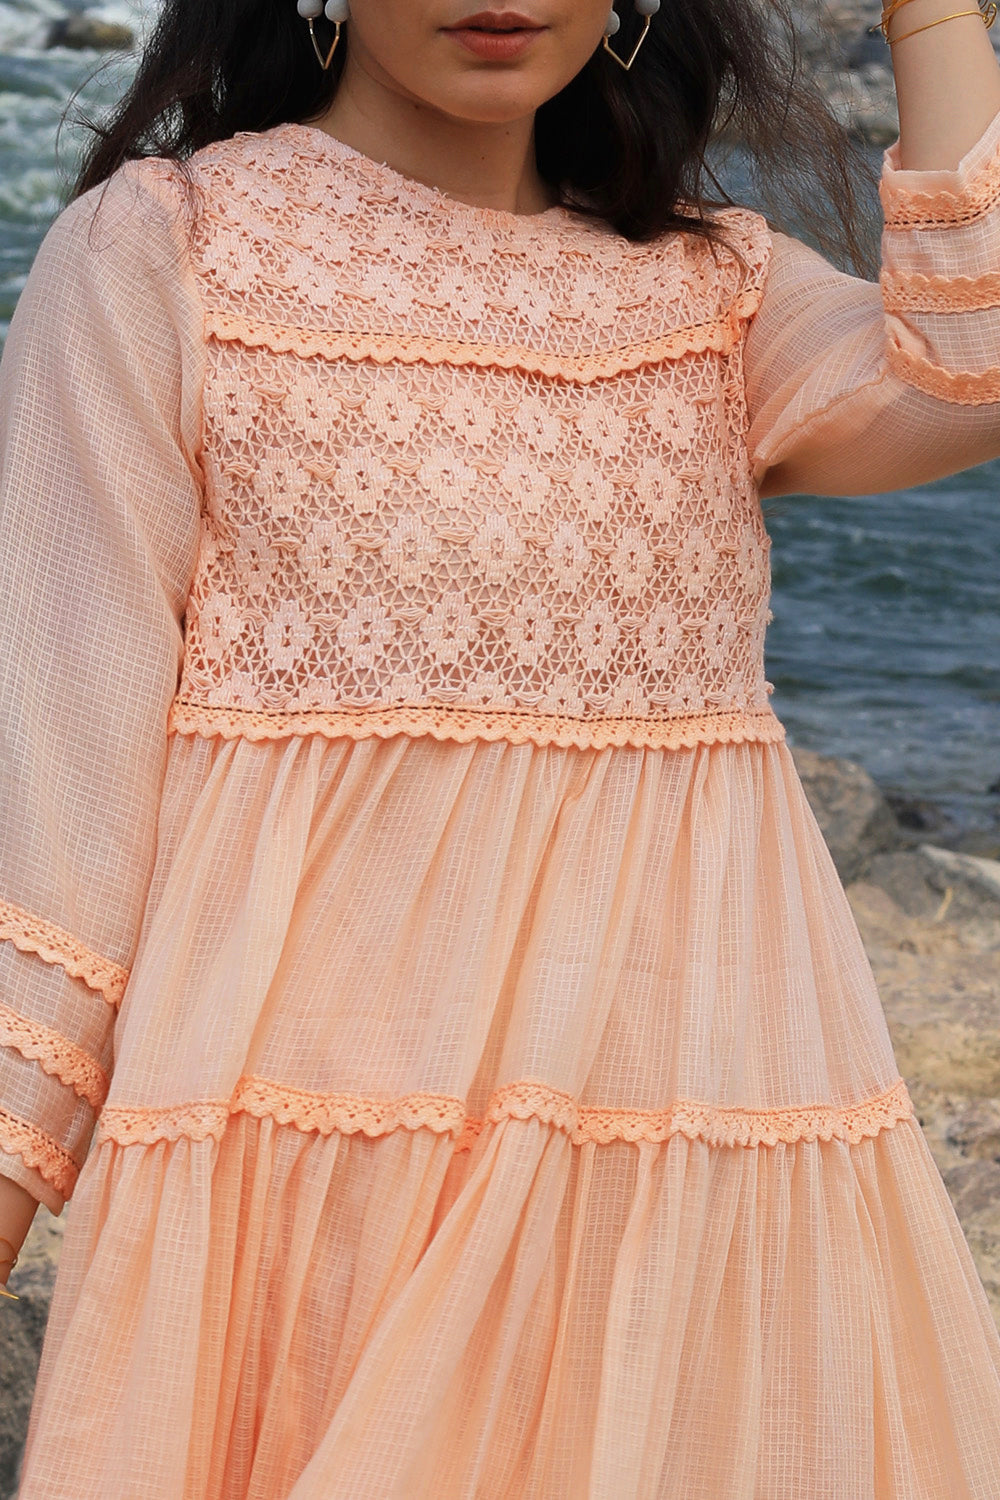 Peach Tiered Lace Dress